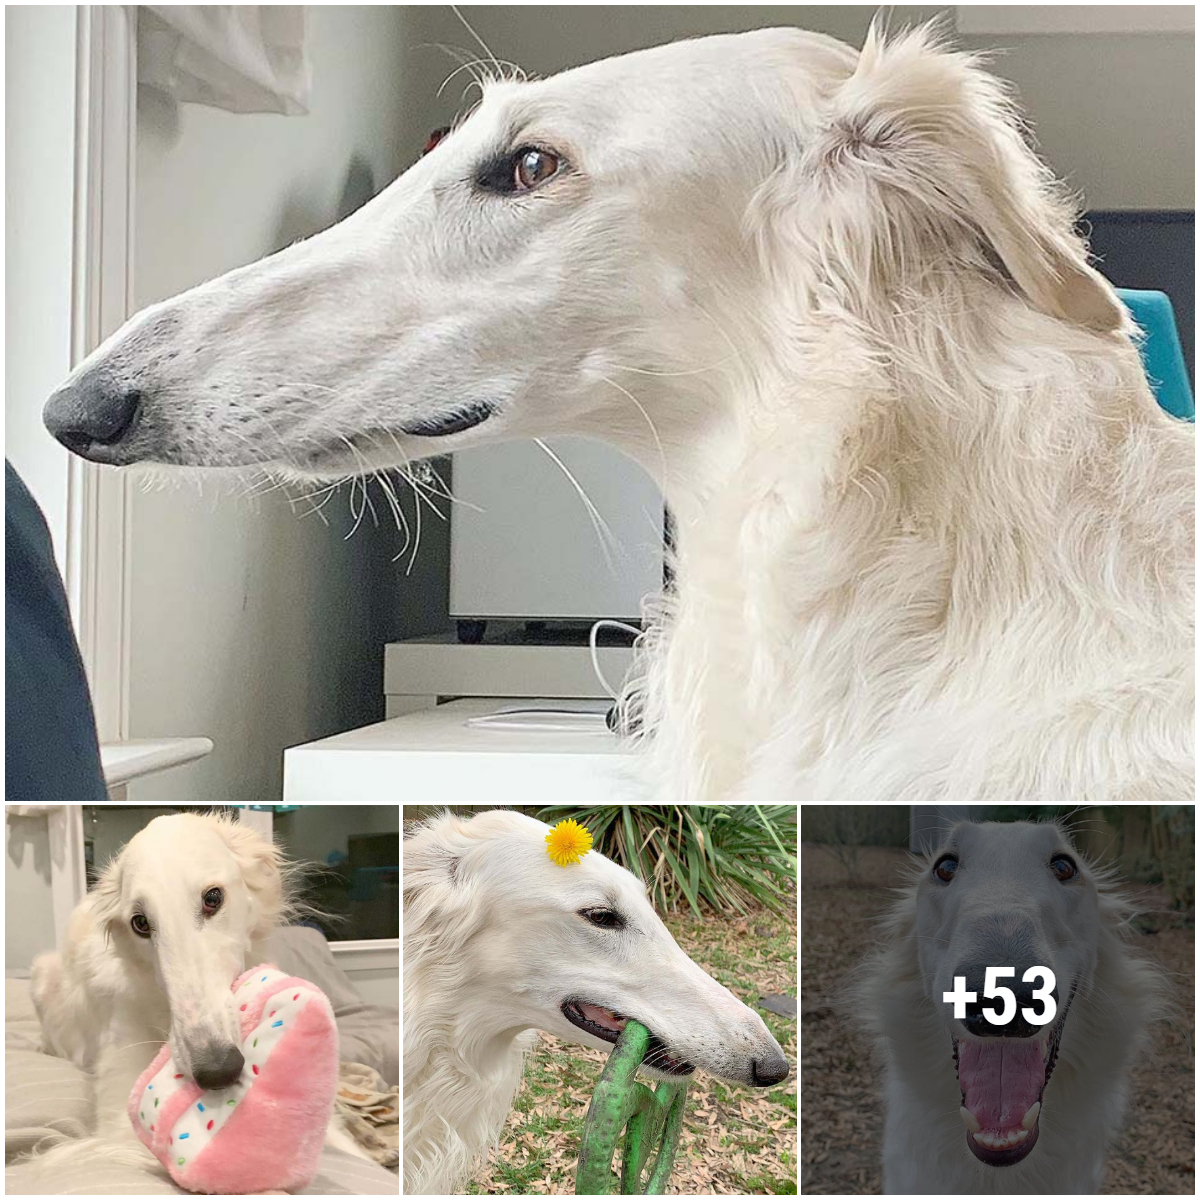 Borzoi dog with an adorable 12-inch long nose is a social network phenomenon that has won the hearts of many people